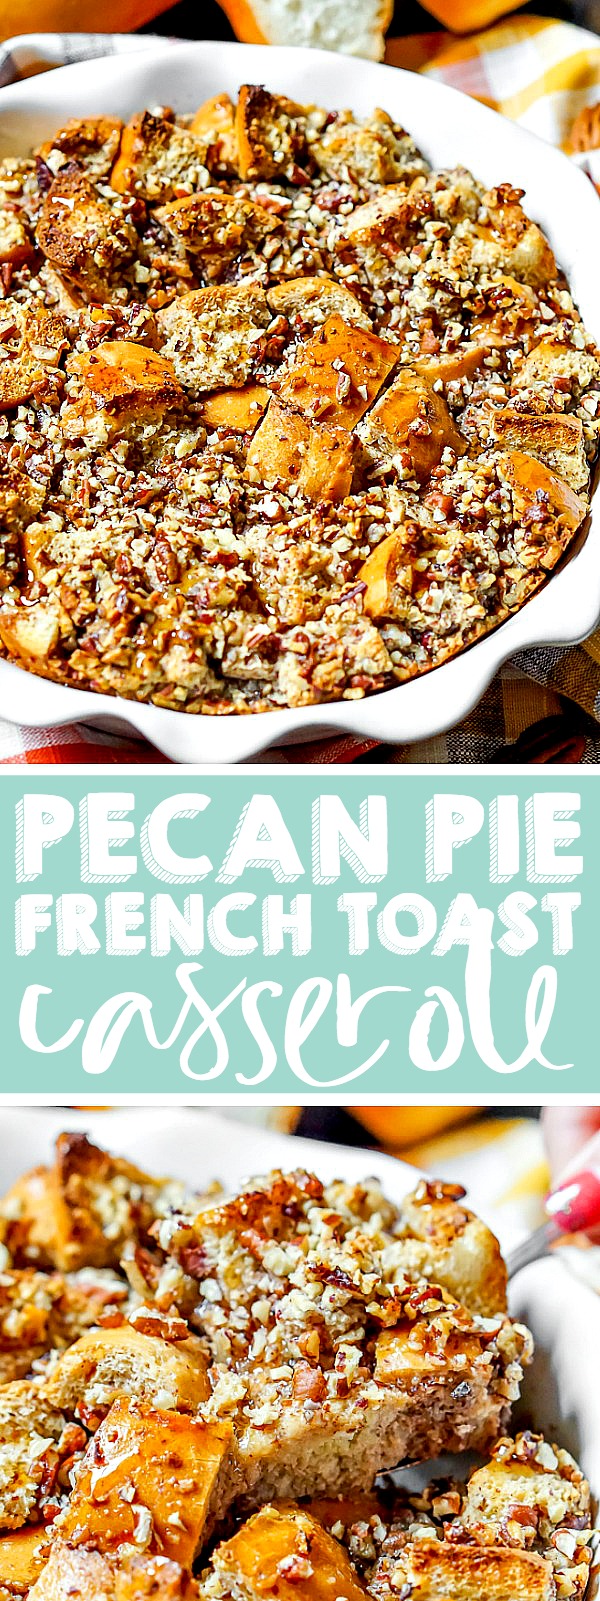 Take all the delicious warm, nutty flavor that you love from classic pecan pie and add it into a perfect holiday breakfast casserole! This Pecan Pie French Toast bake will make a tasty brunch recipe for Thanksgiving, Christmas, or New Year's Day!! | THE LOVE NERDS #breakfastrecipe #frenchtoastcasserole #thanksgivingbreakfast #christmasbreakfast #holidaybrunch